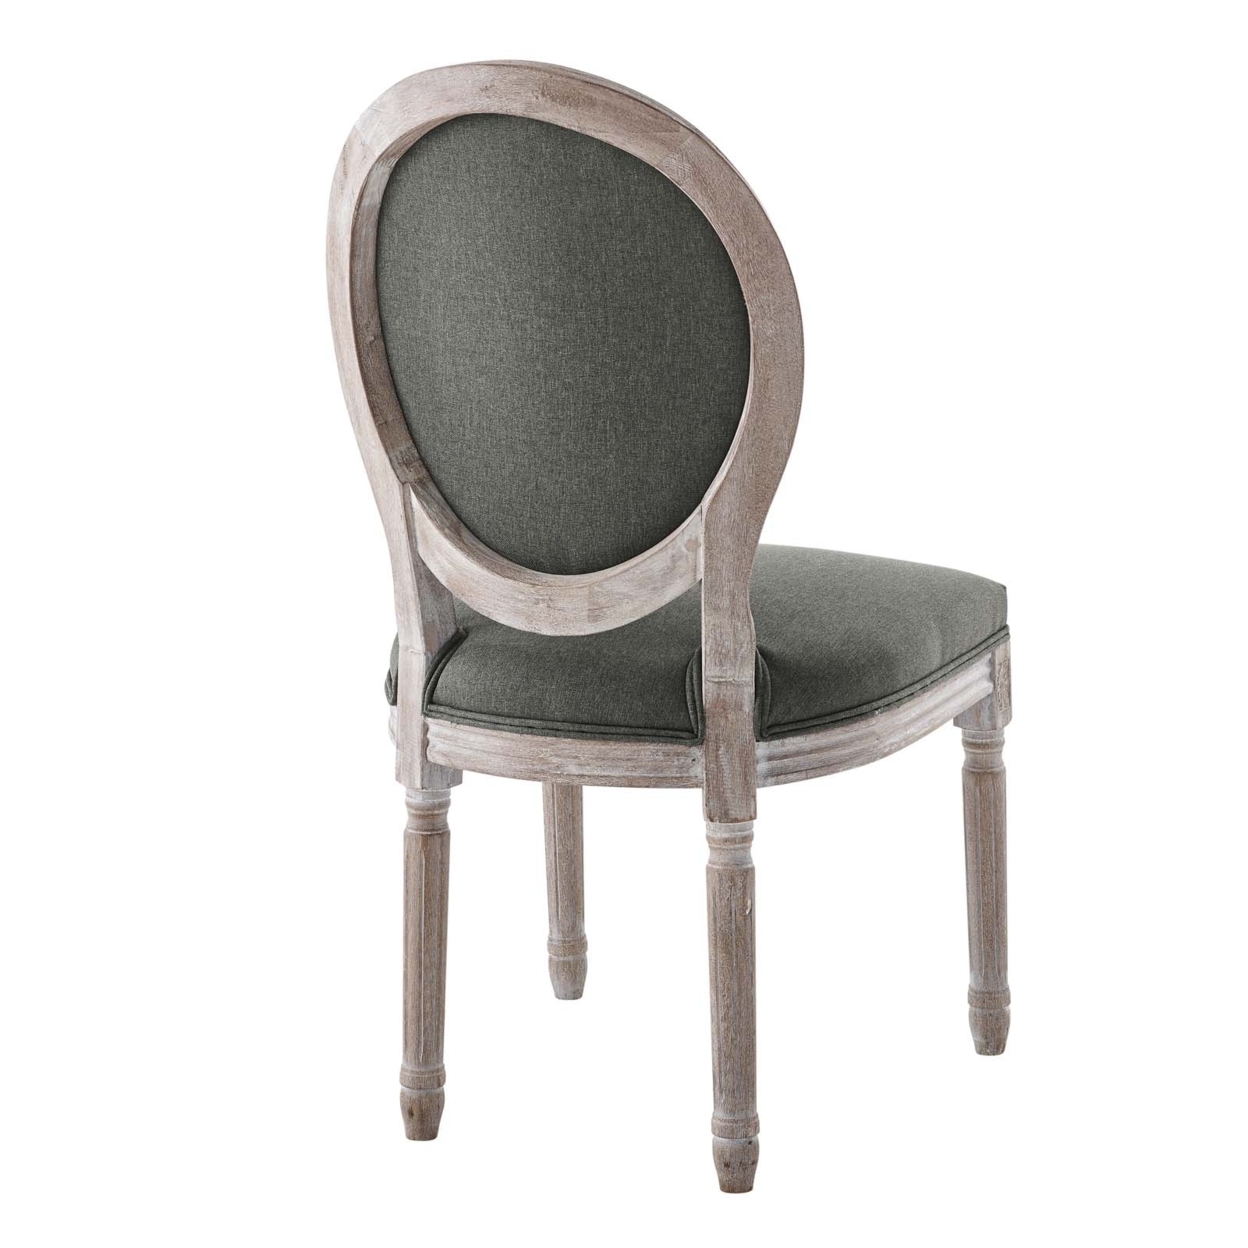 Arise Vintage French Upholstered Fabric Dining Side Chair, Natural Gray